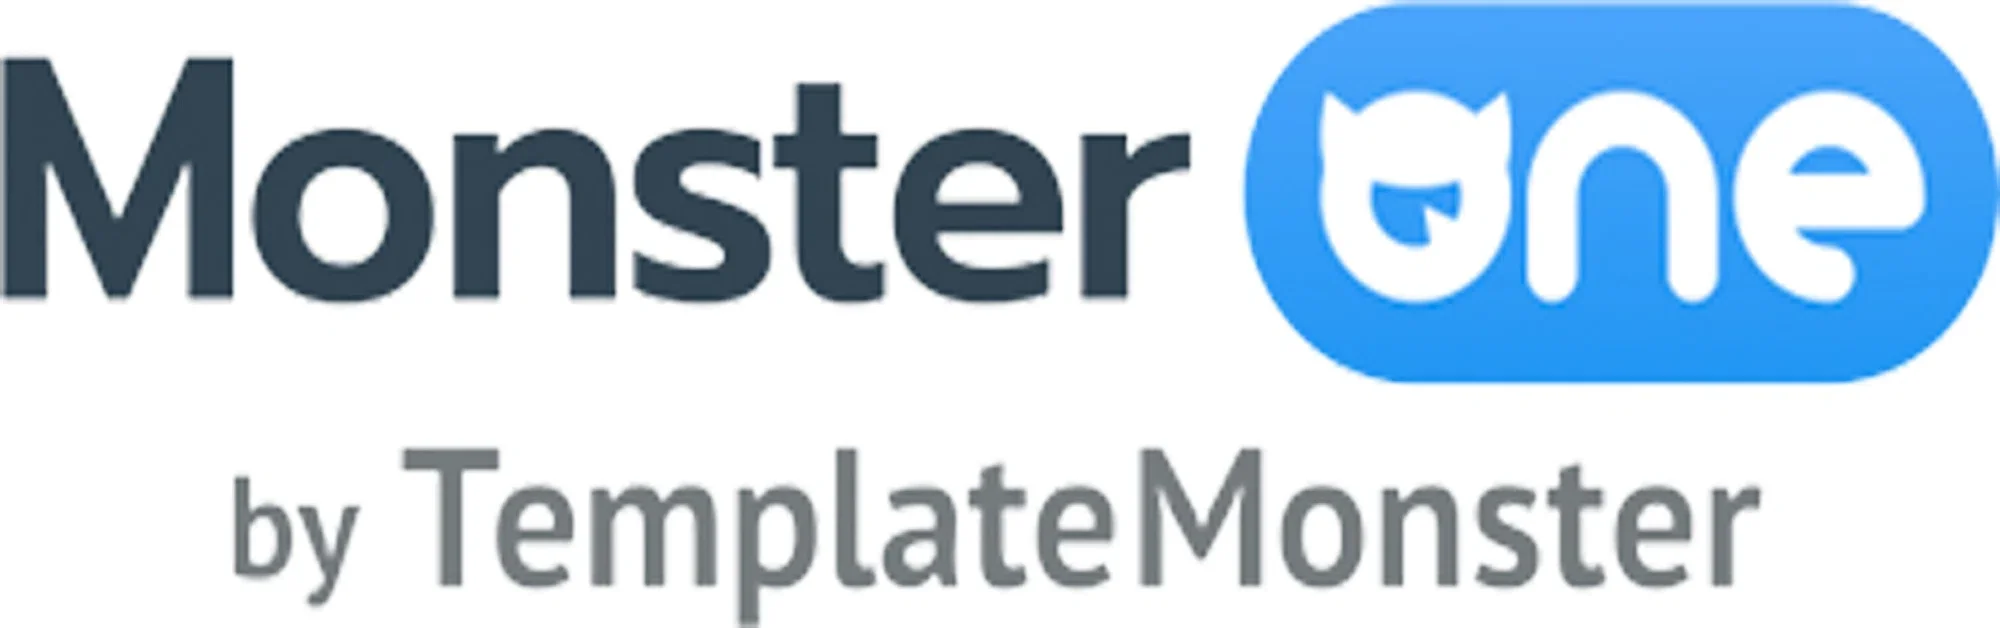 Monsterone Promo Codes & Coupons